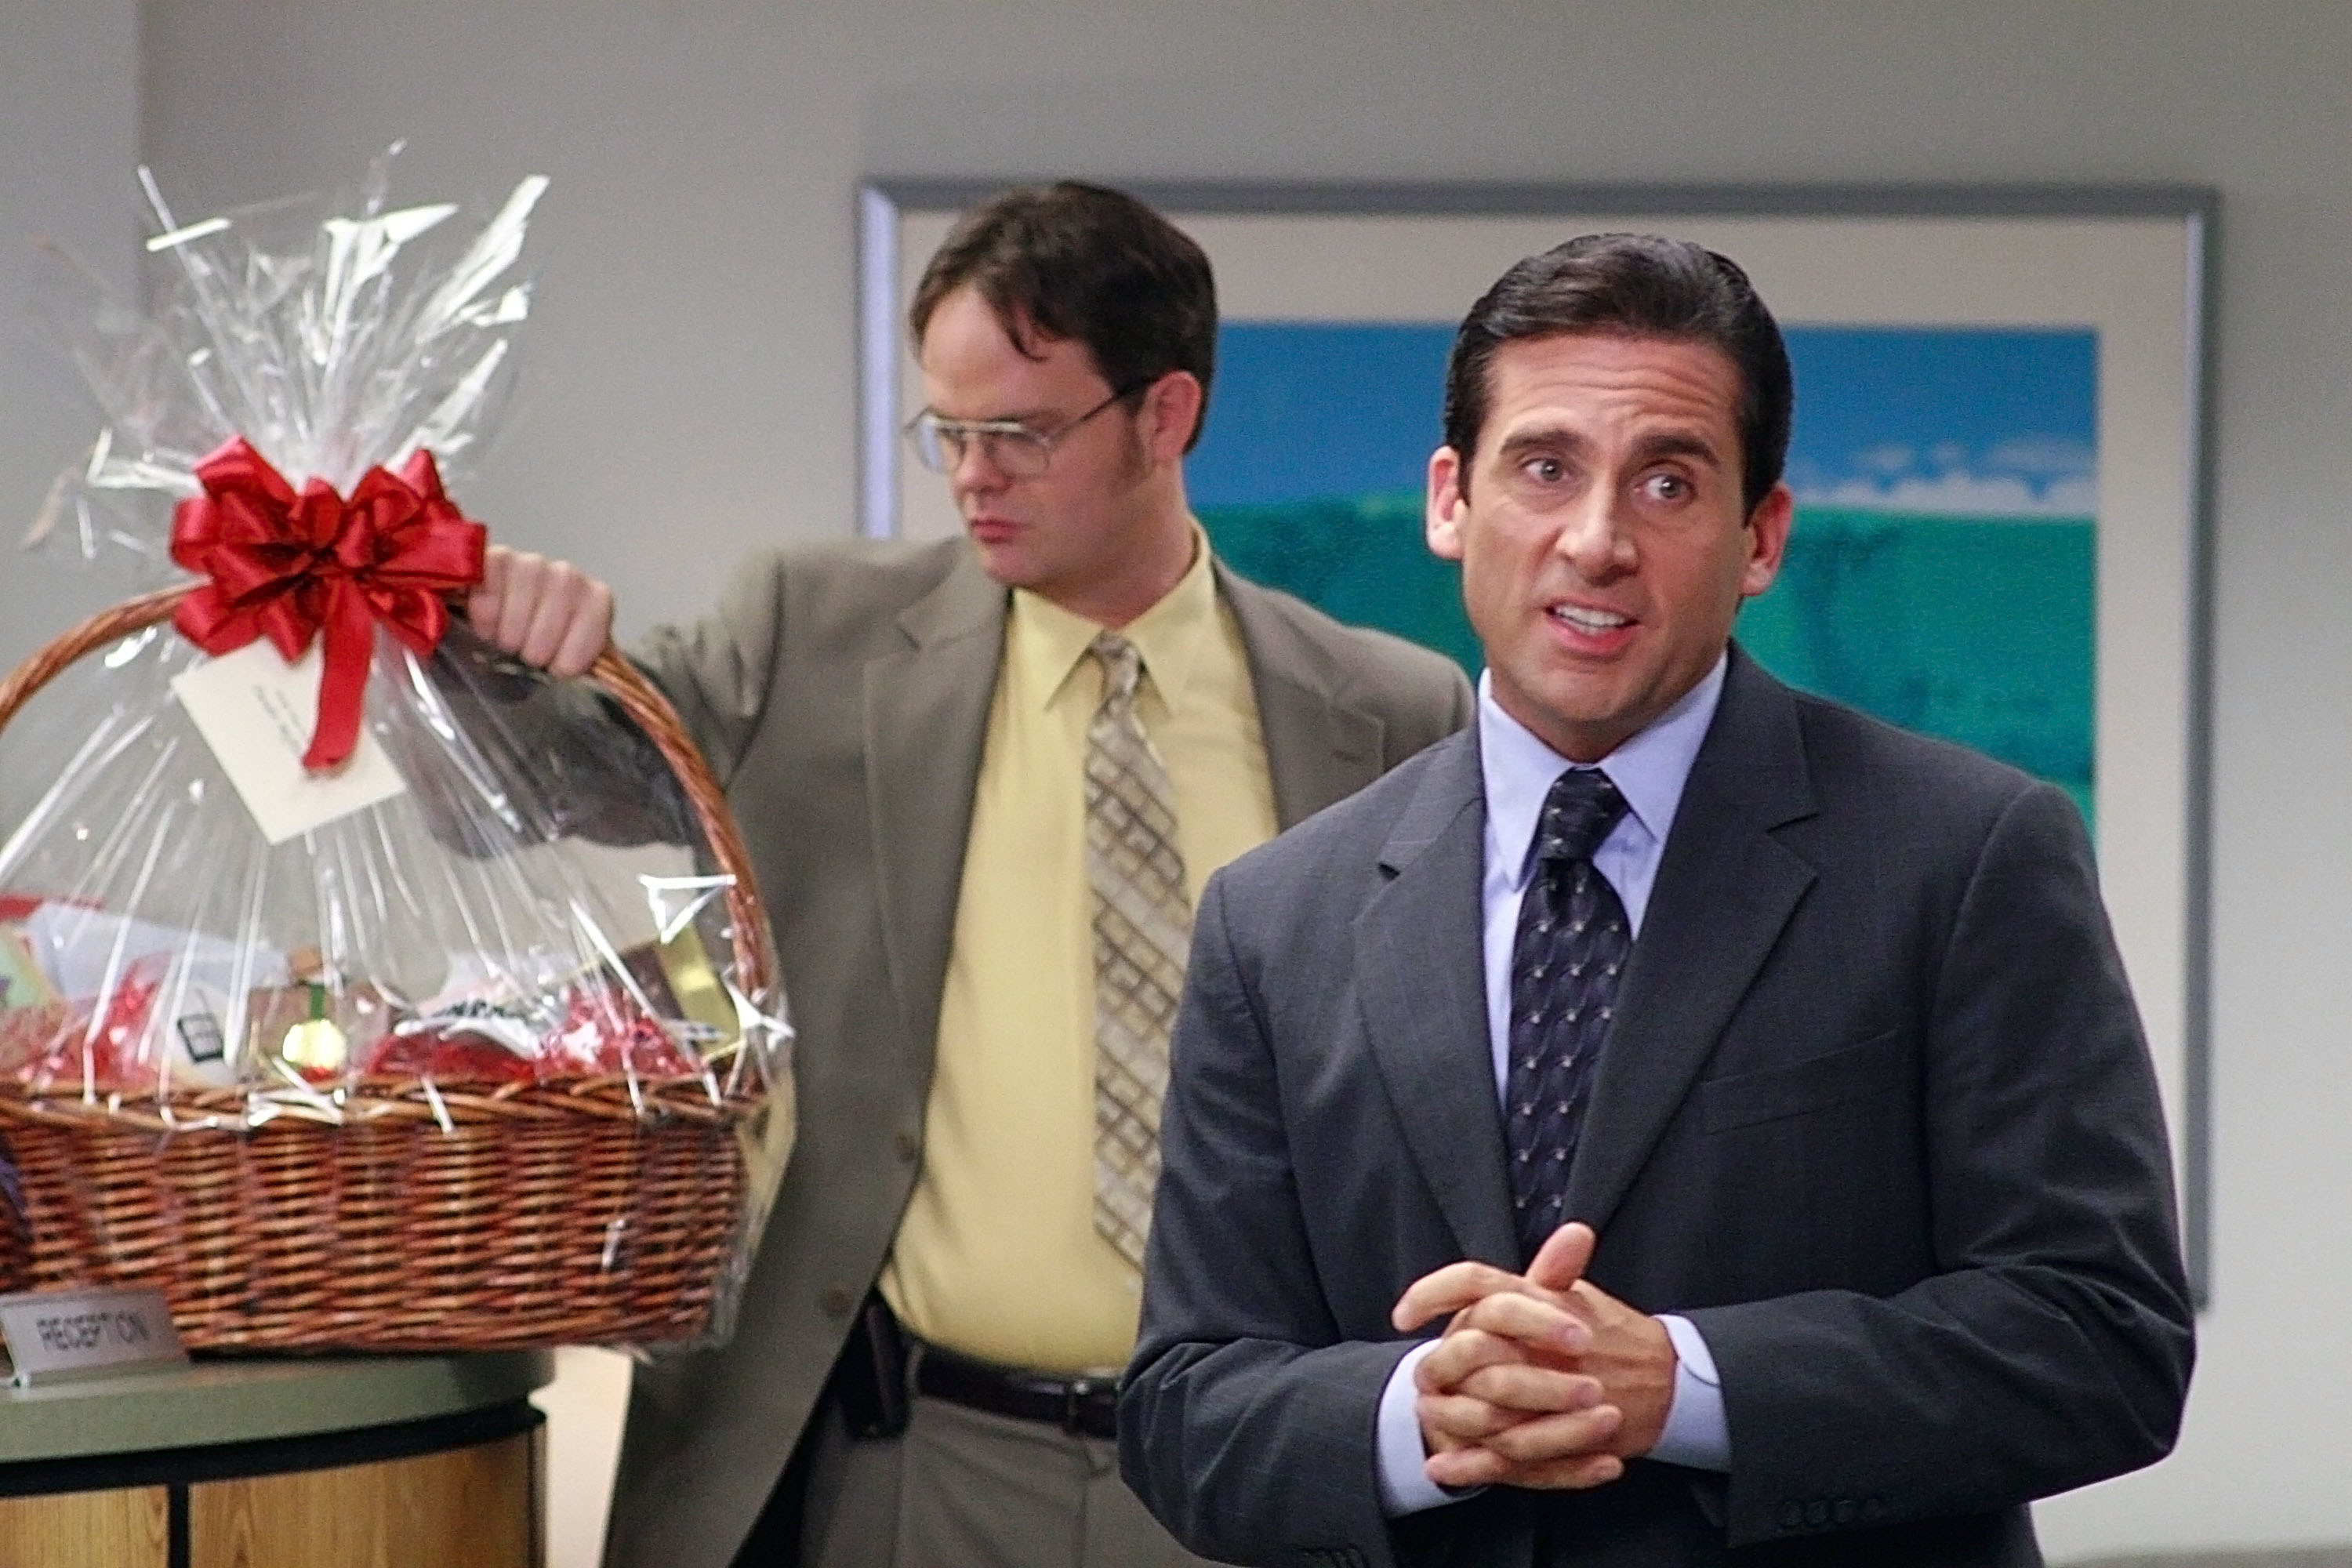 Dwight holds a gift basket behind Michael